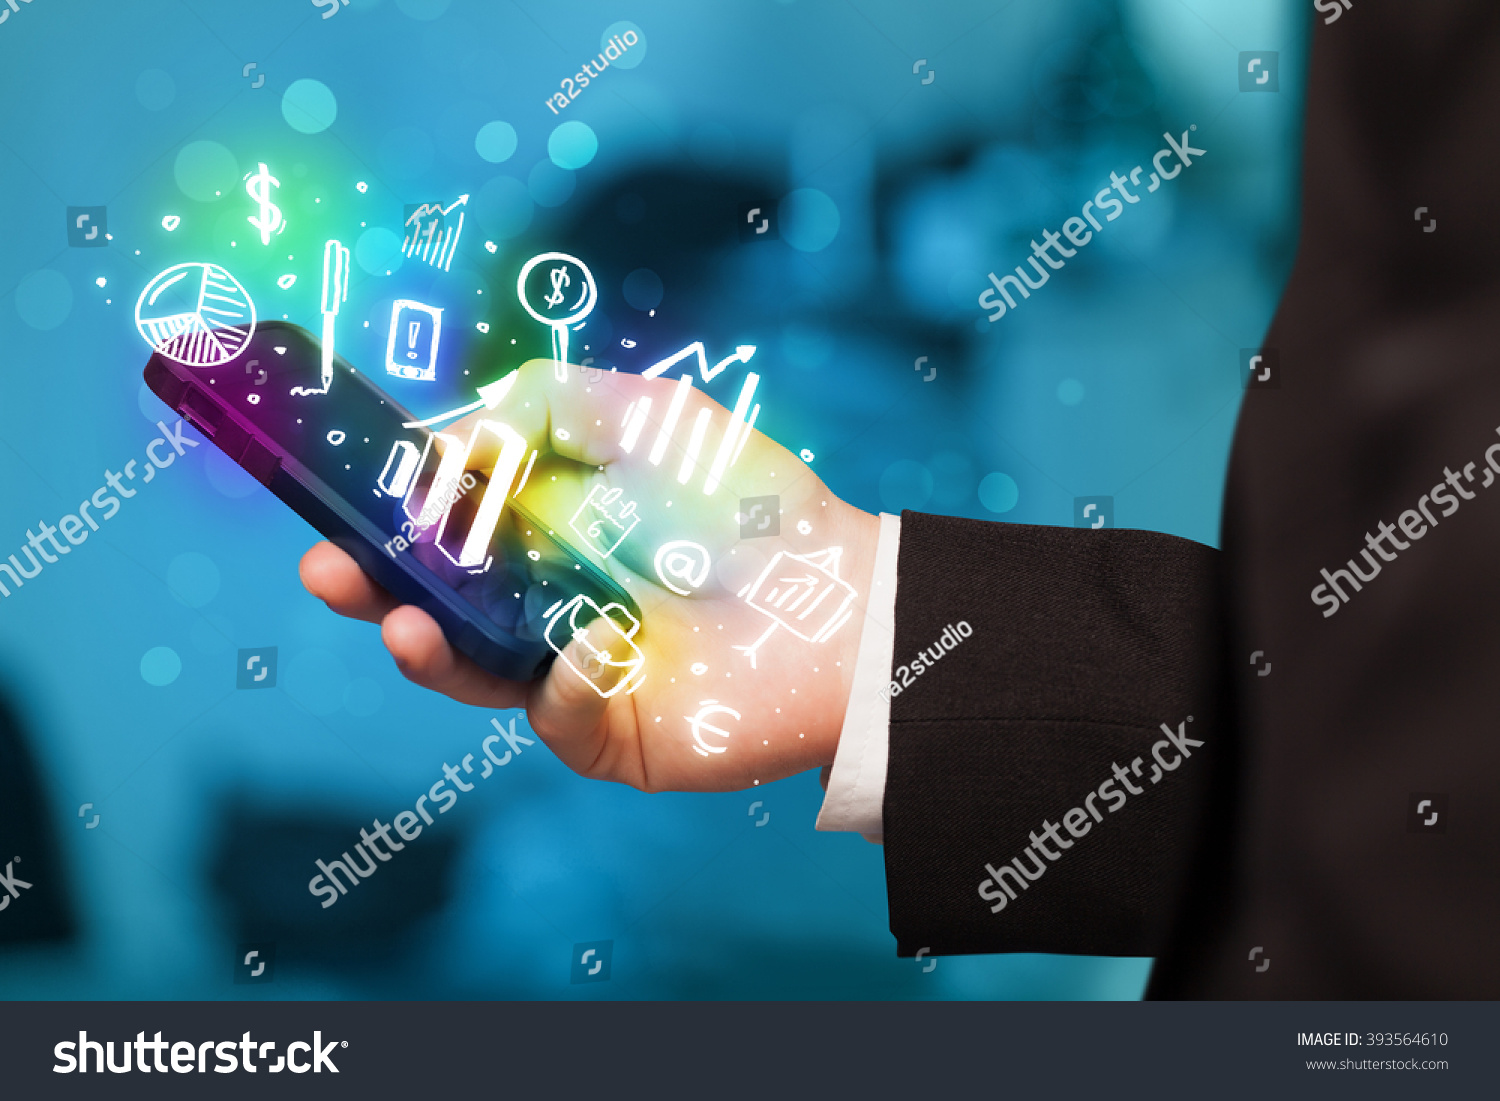 Smartphone with finance and market icons and symbols concept #393564610